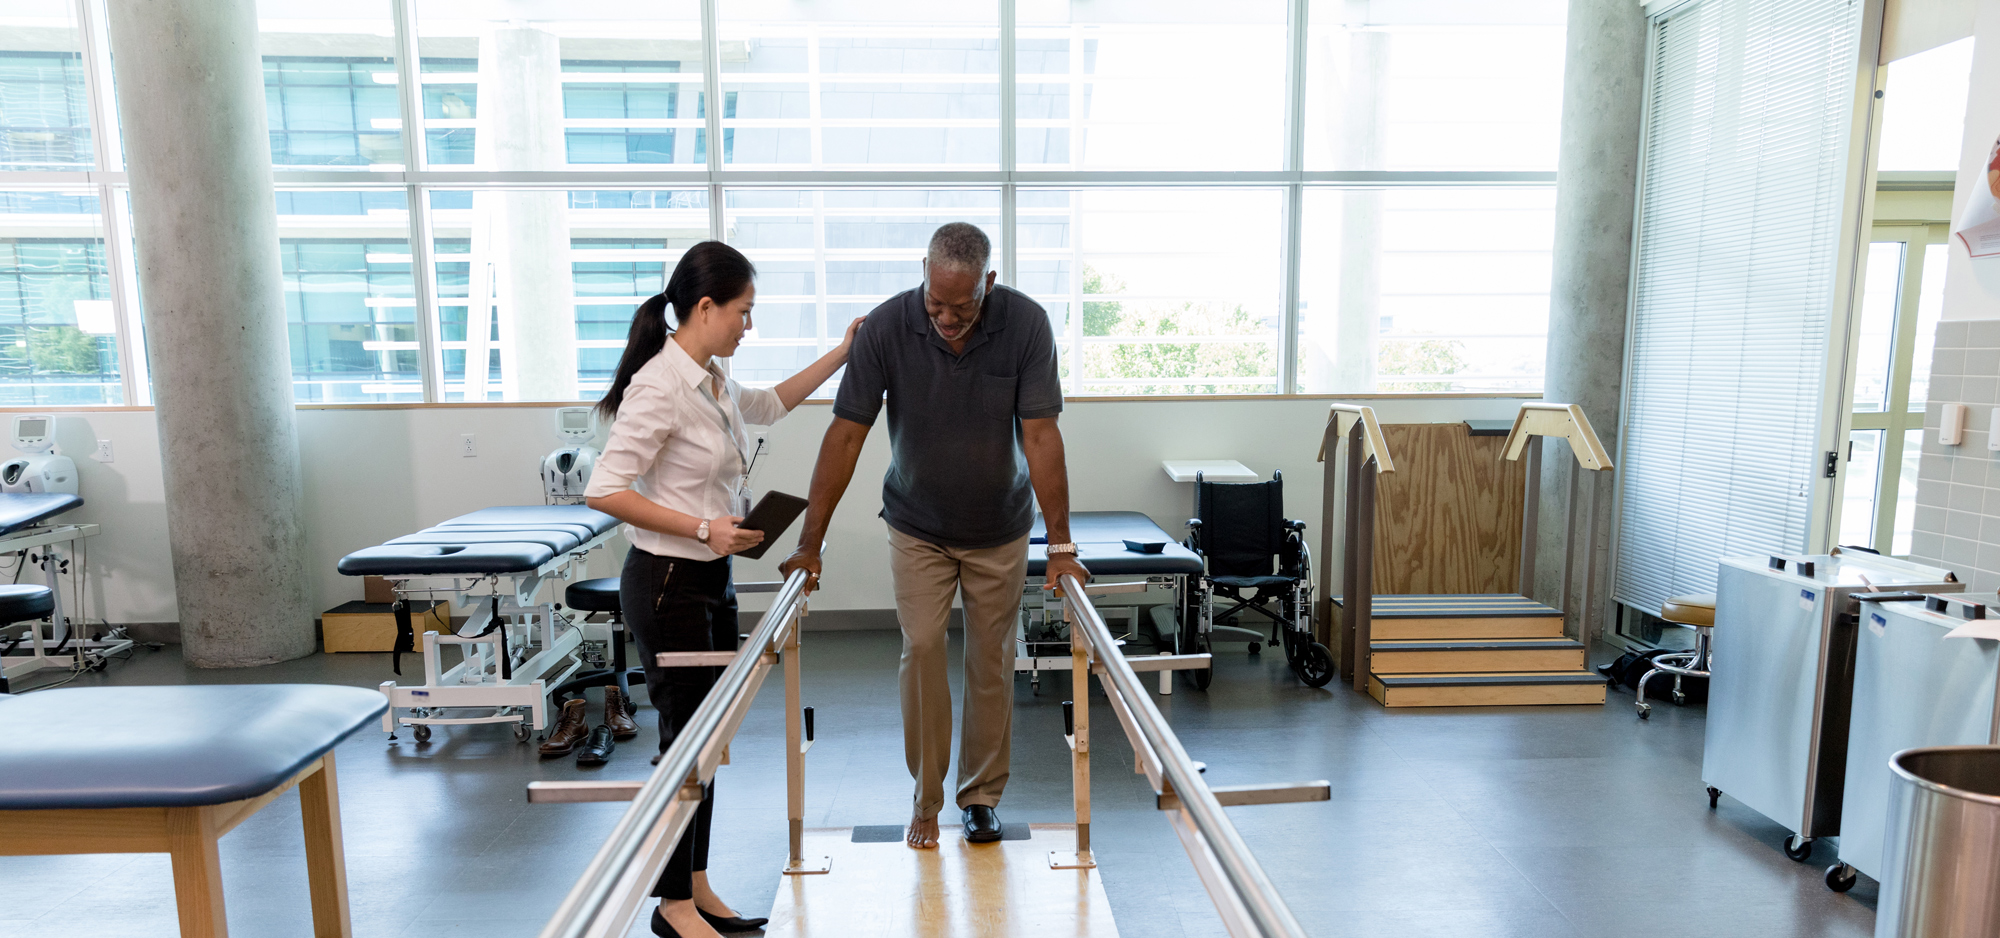 therapist helping senior man do physical therapy on balance bars